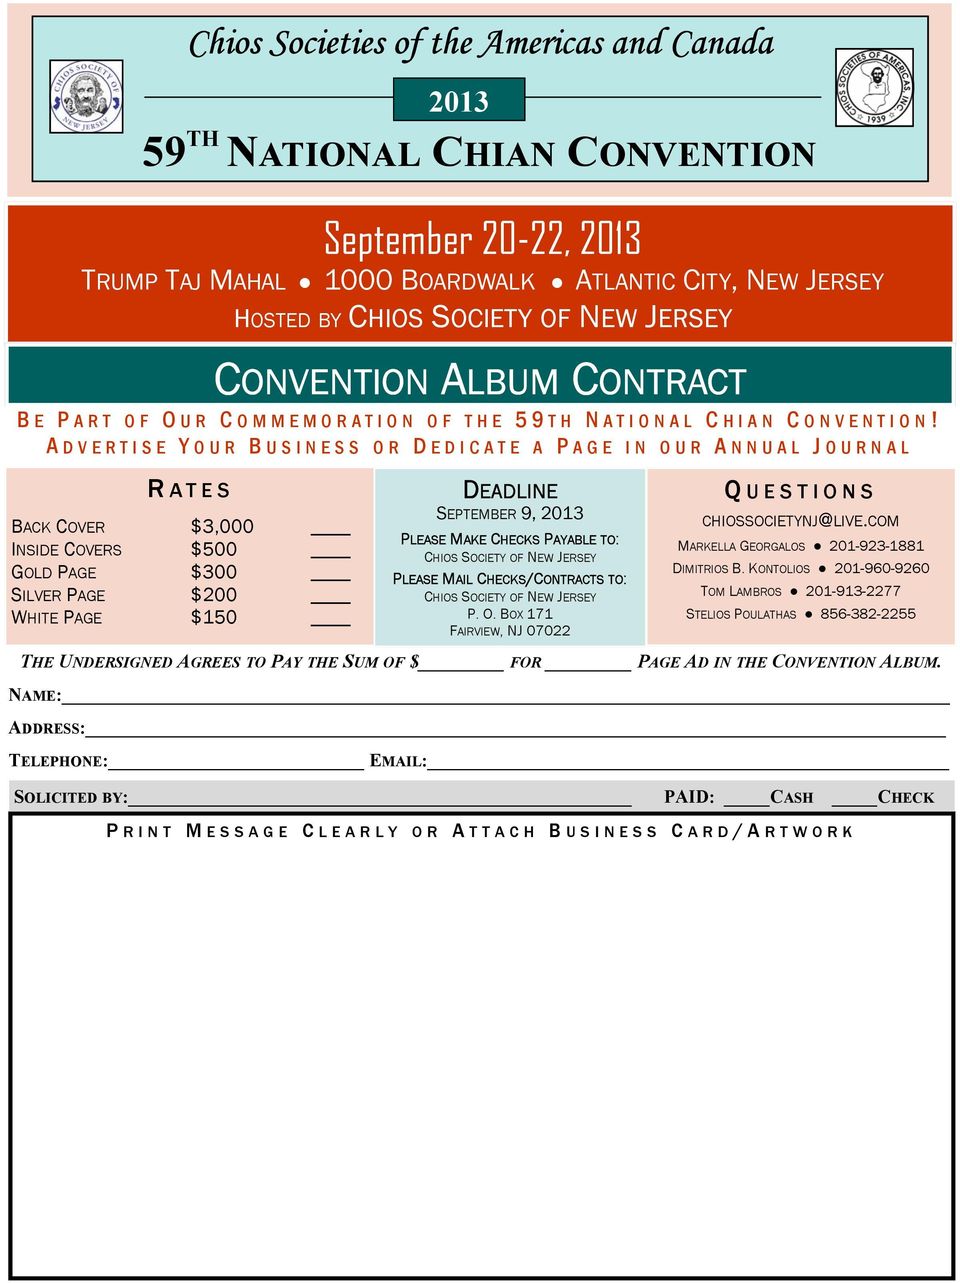 A DVERTISE YOUR BUSINESS OR DEDICATE A PAGE IN OUR ANNUAL JOURNAL R ATES BACK COVER $3,000 INSIDE COVERS $500 GOLD PAGE $300 SILVER PAGE $200 WHITE PAGE $150 2013 CONVENTION ALBUM CONTRACT DEADLINE